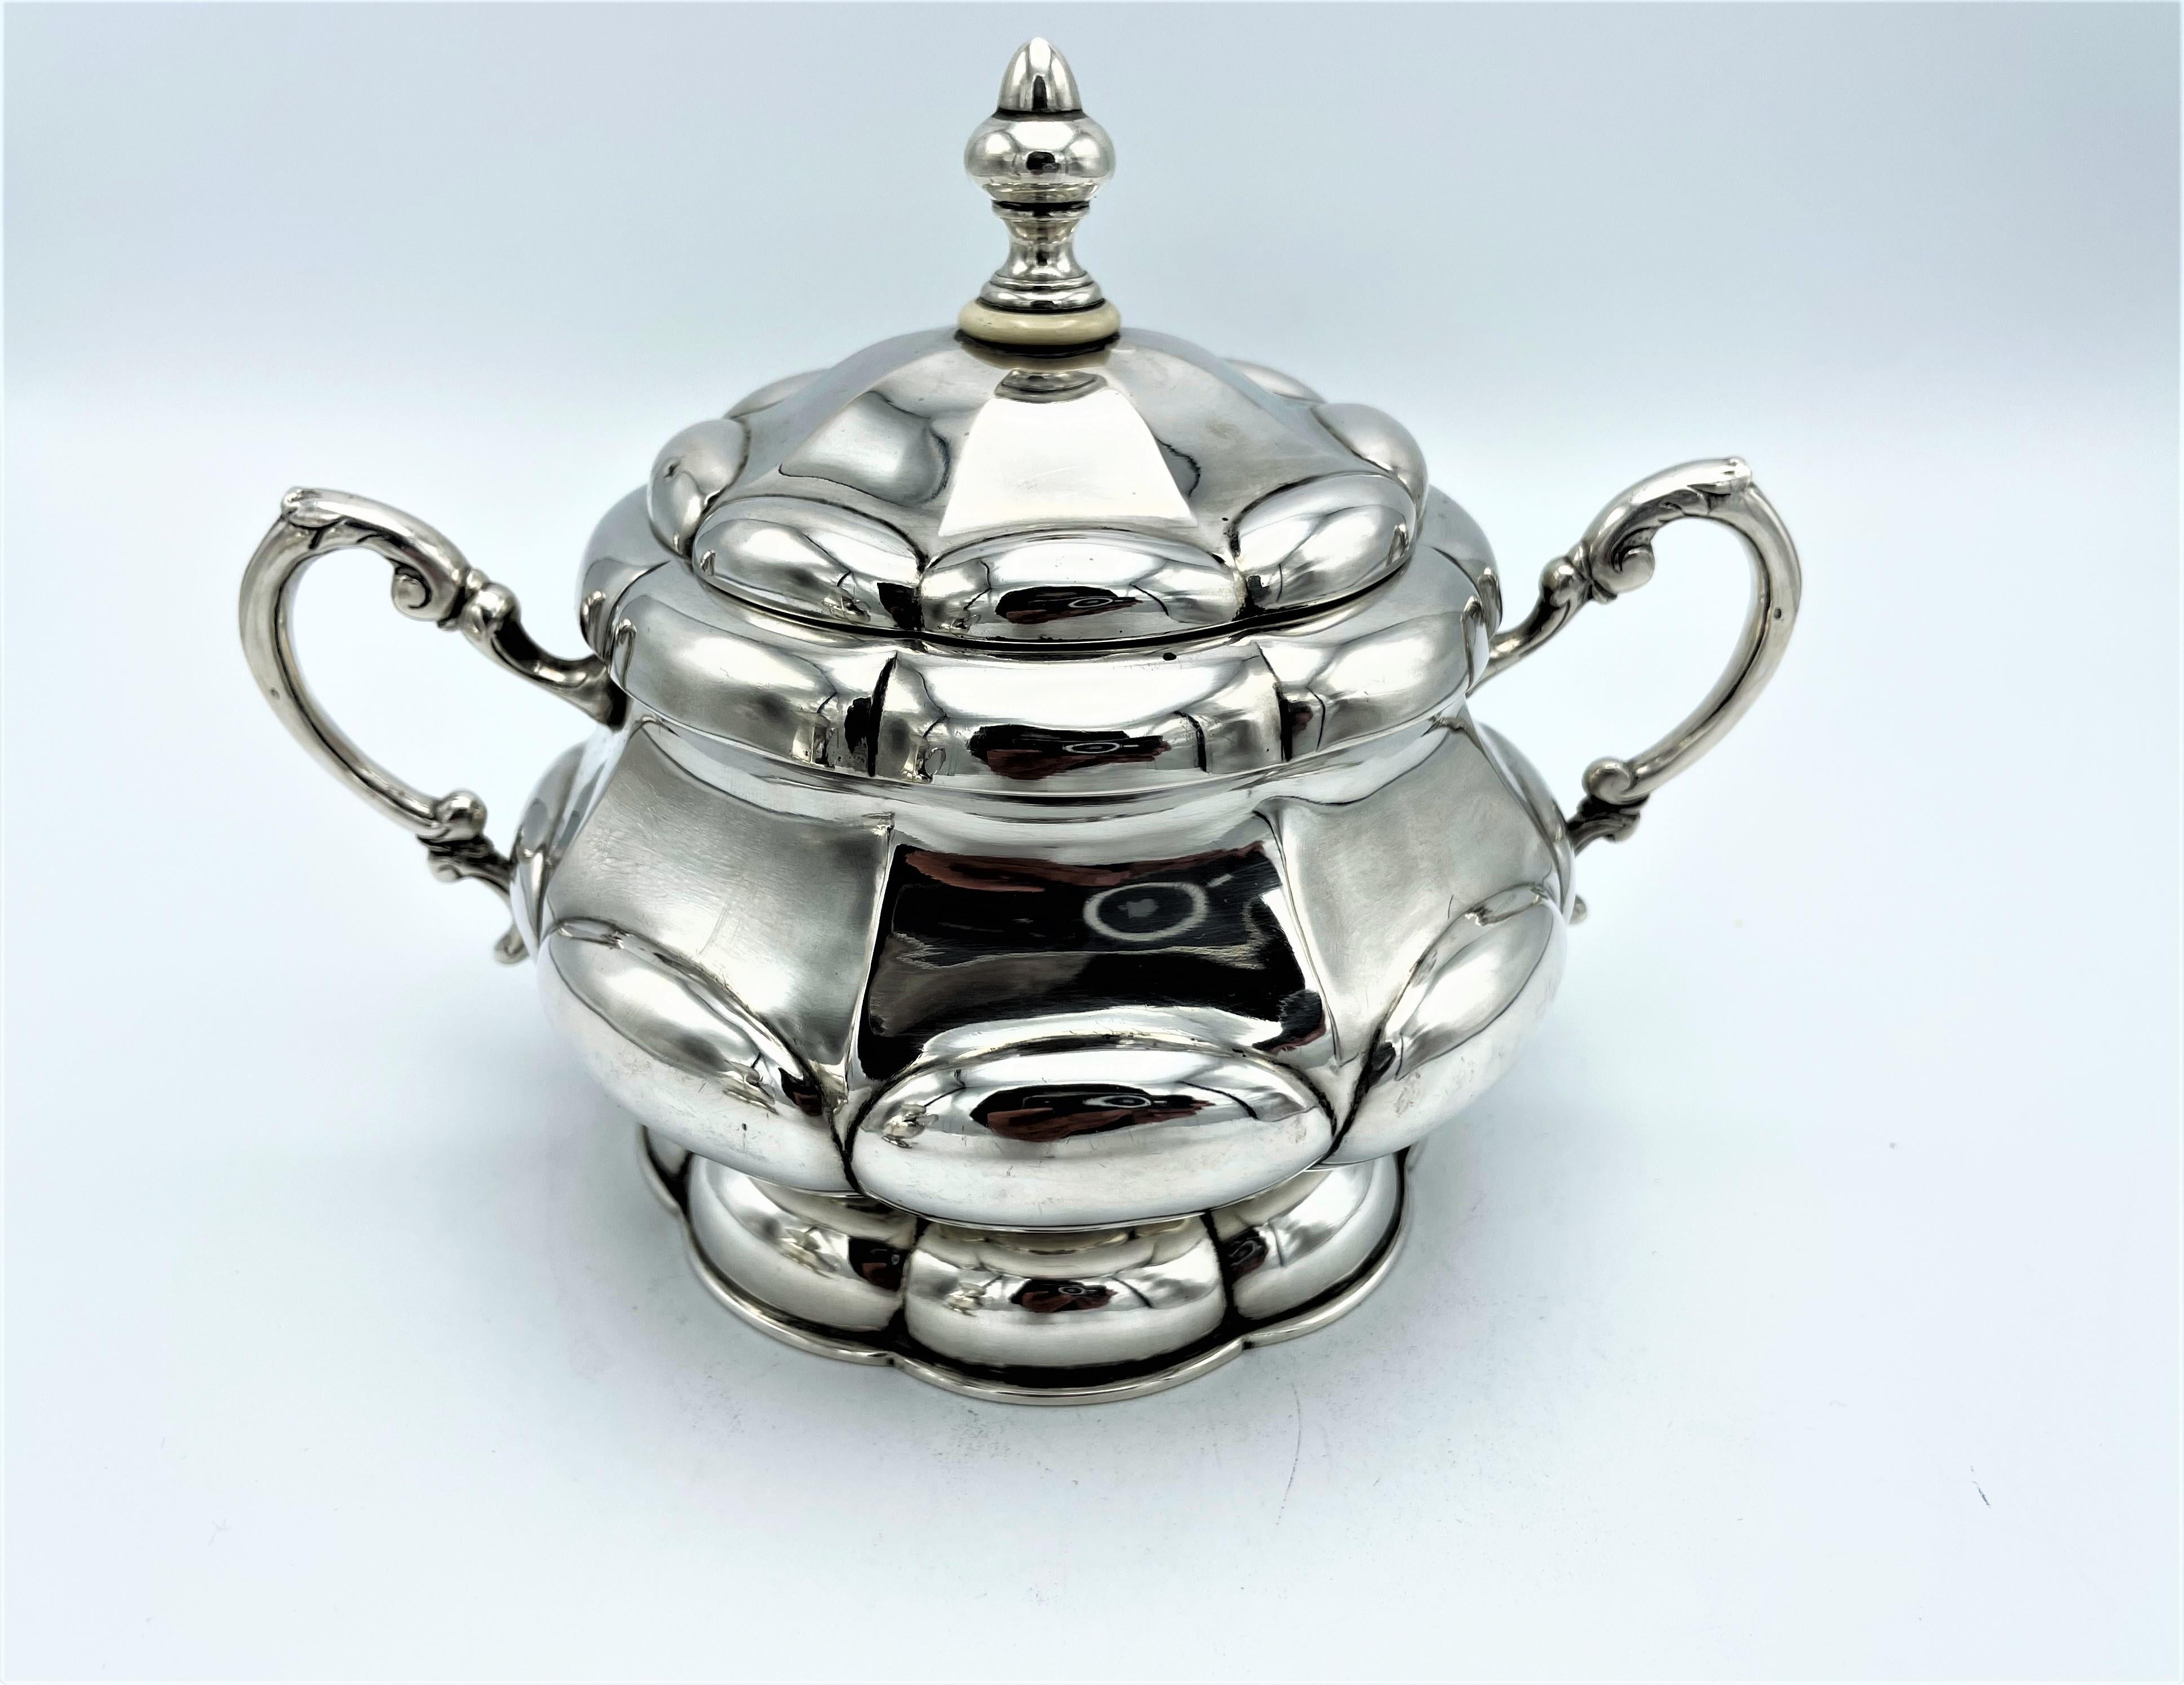 Austria-Hungary sterling silver 5 parts coffee service with tray, 1870s - 1920s For Sale 4